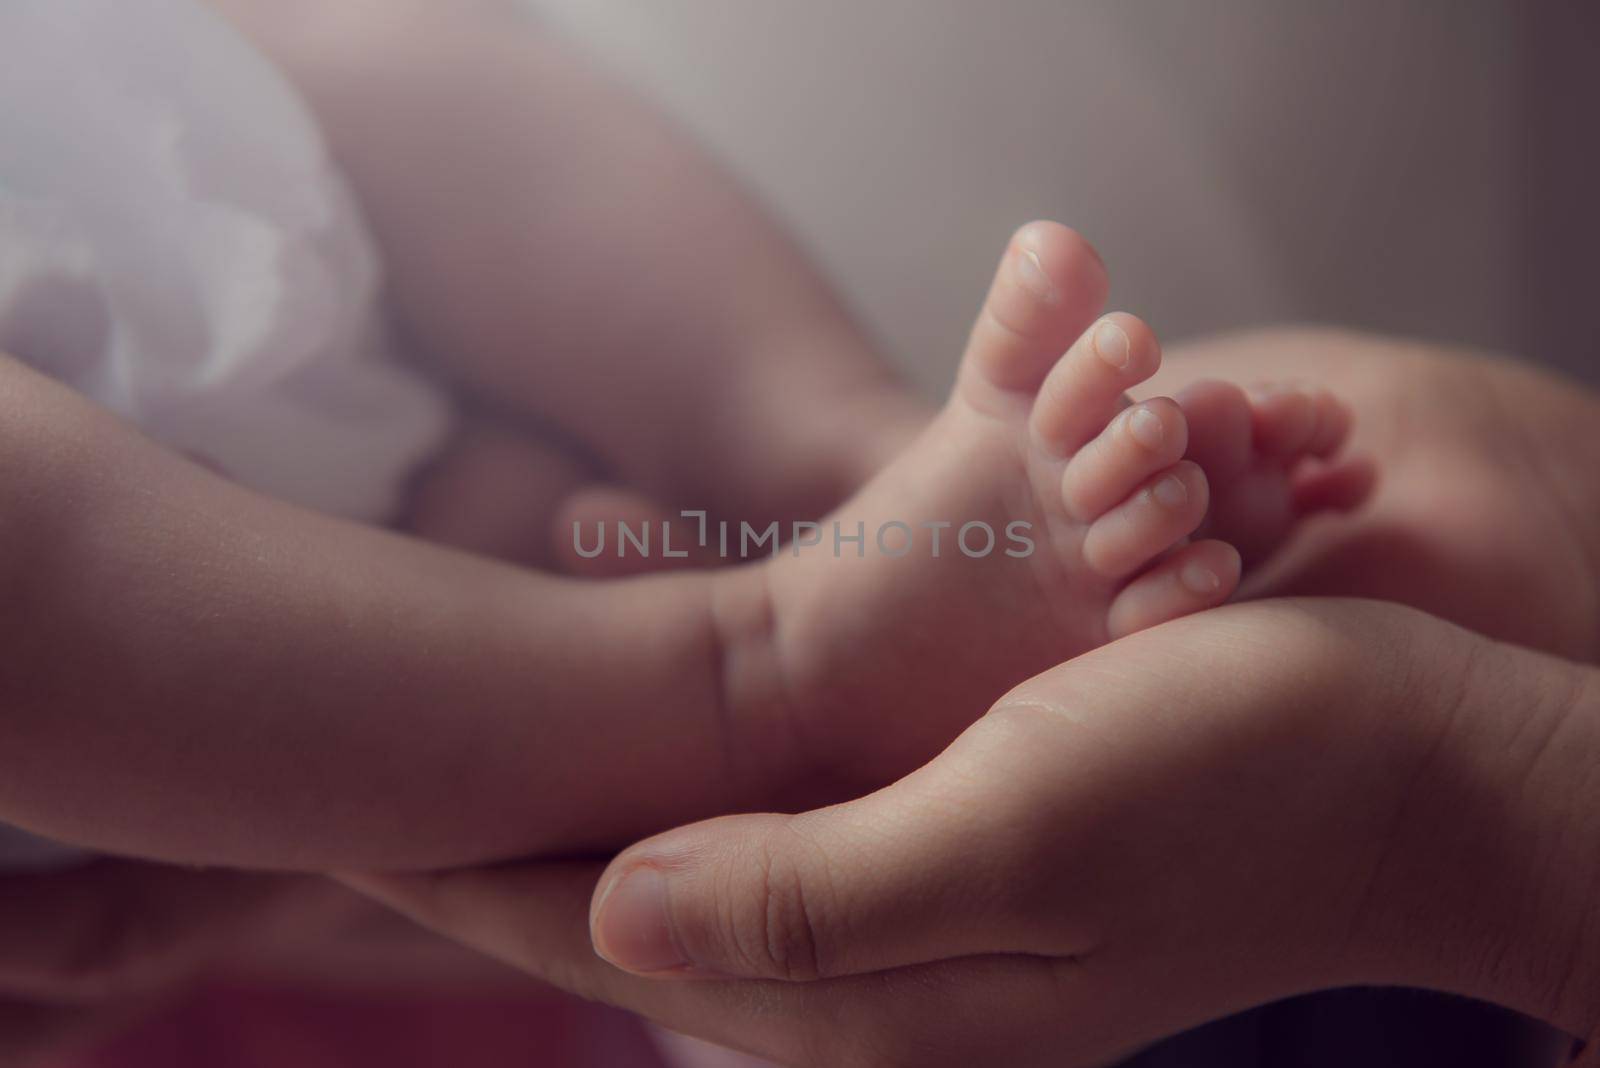 Parent holding in the hands feet of newborn baby.